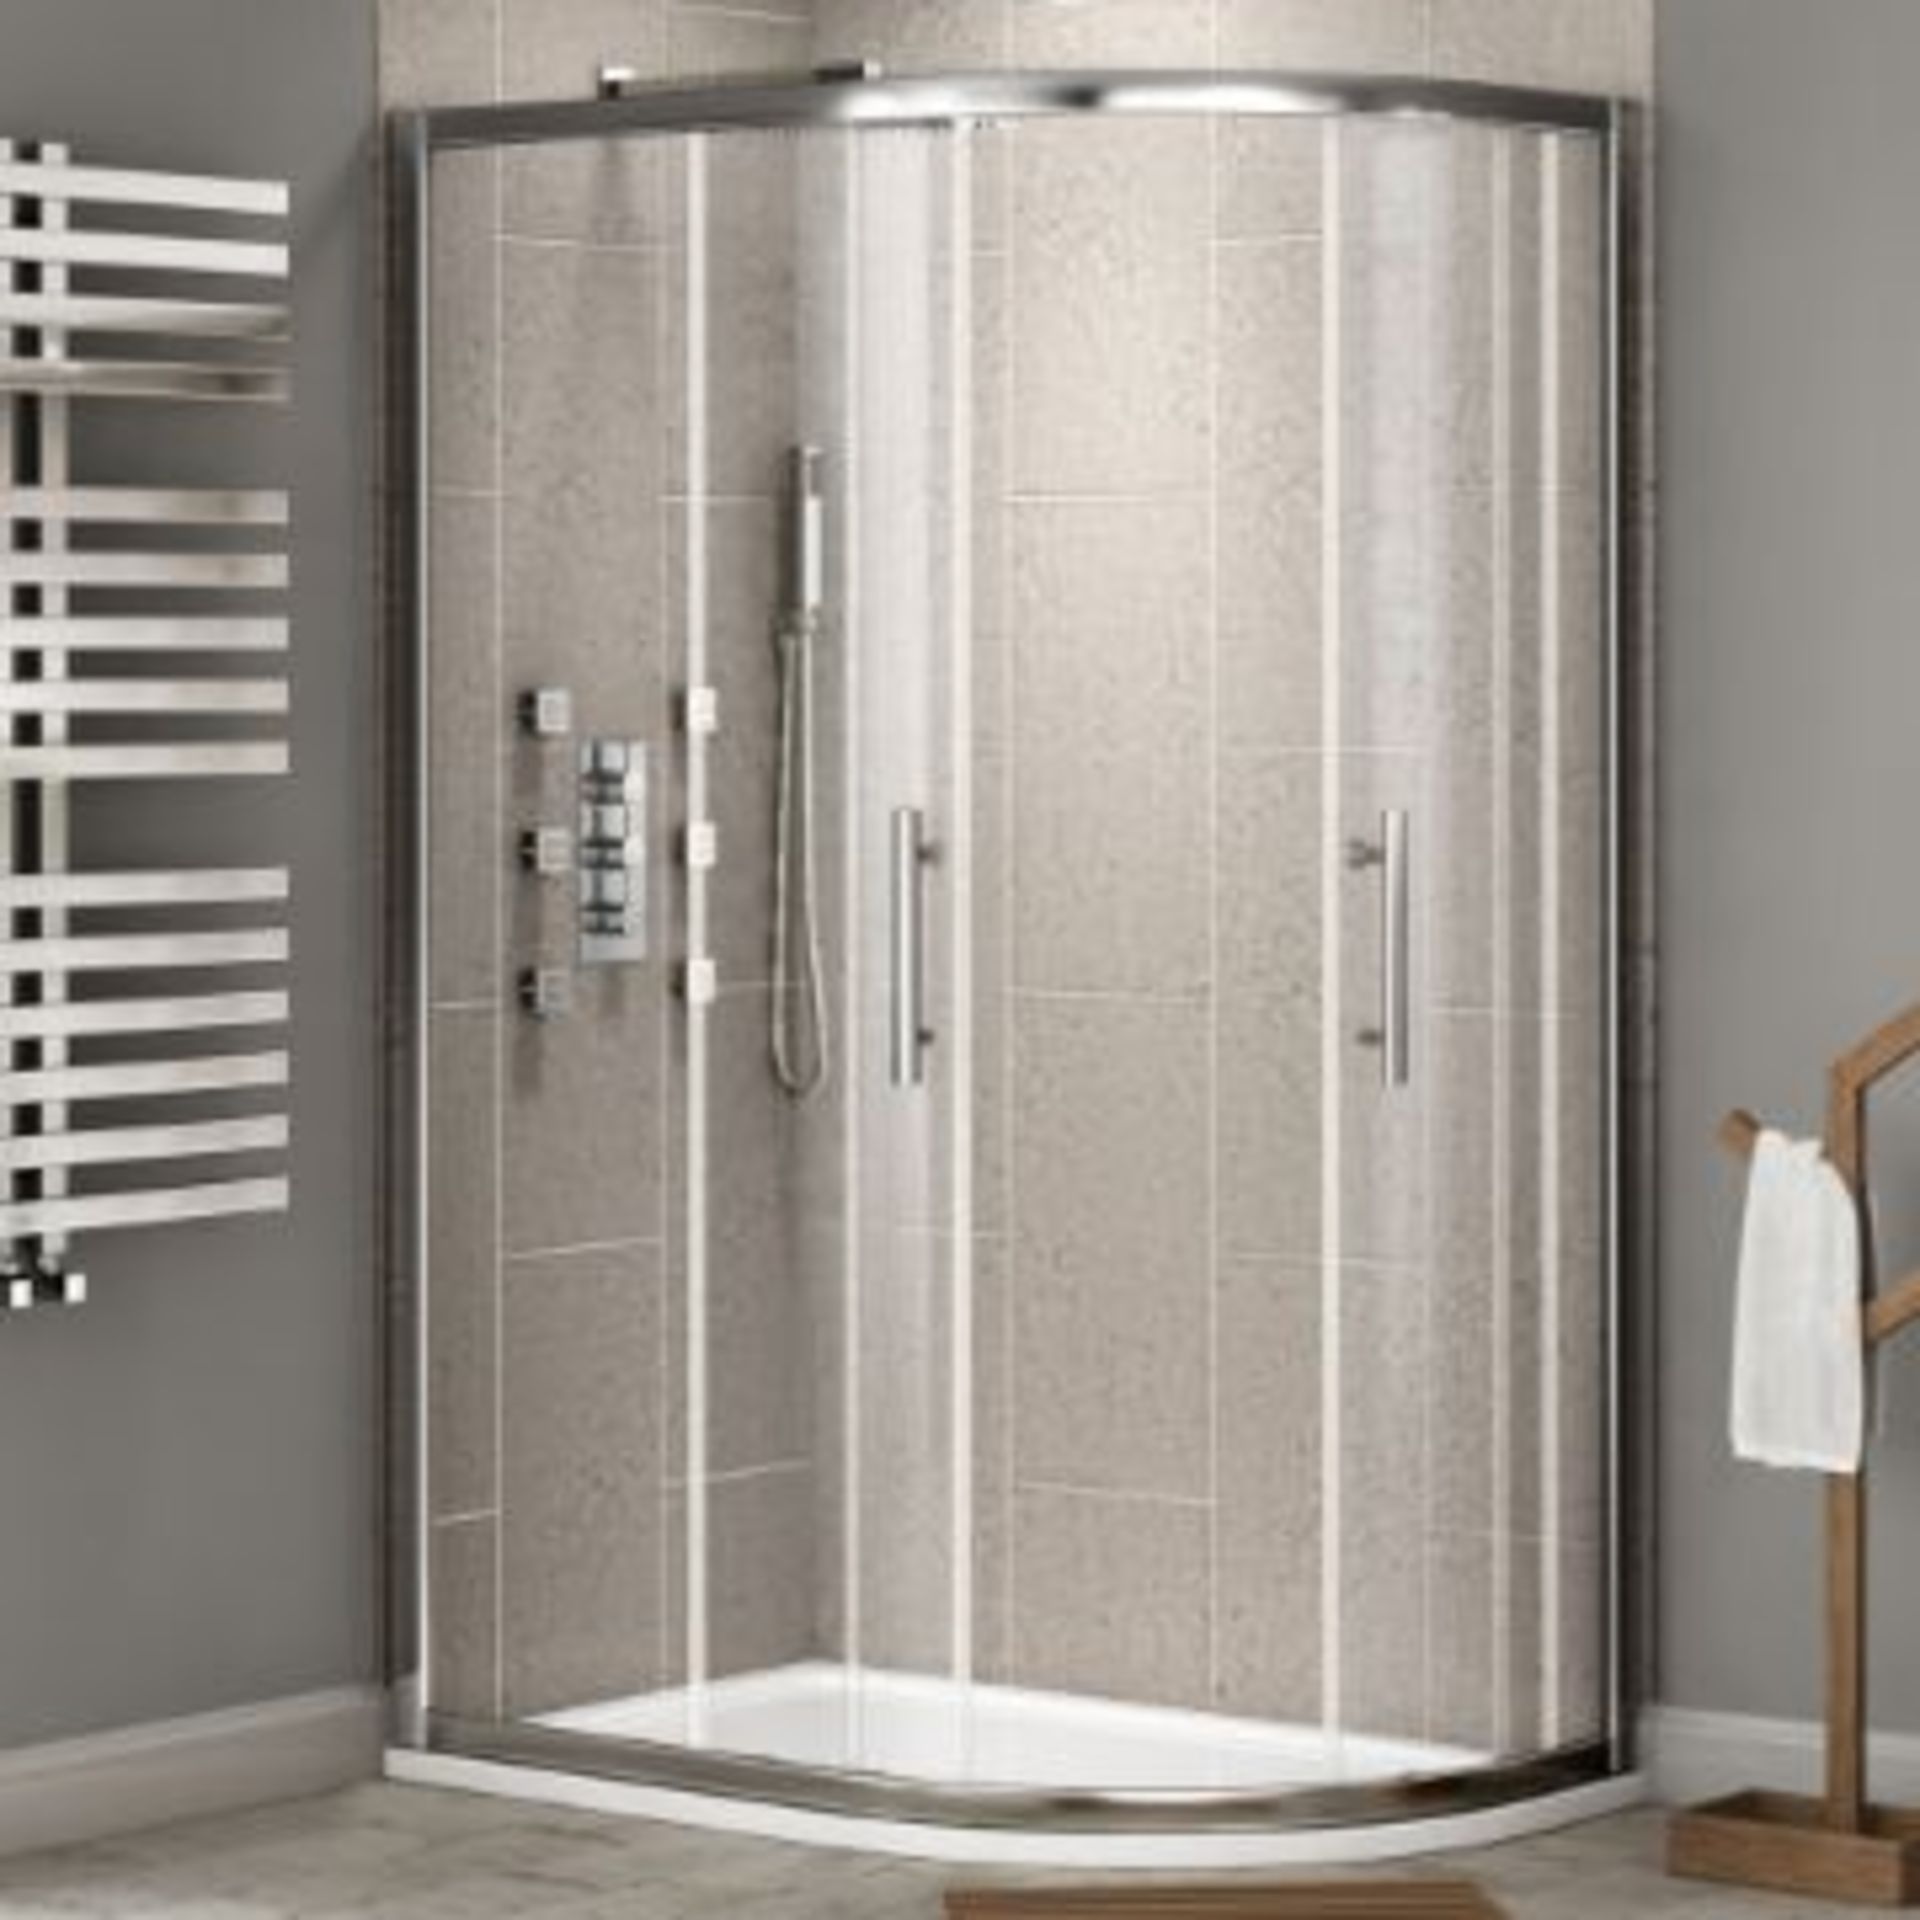 NEW Twyford's 900x800 mm - 8 mm - Premium Easy clean Offset Quadrant Shower Enclosure - Reversible . - Image 2 of 2